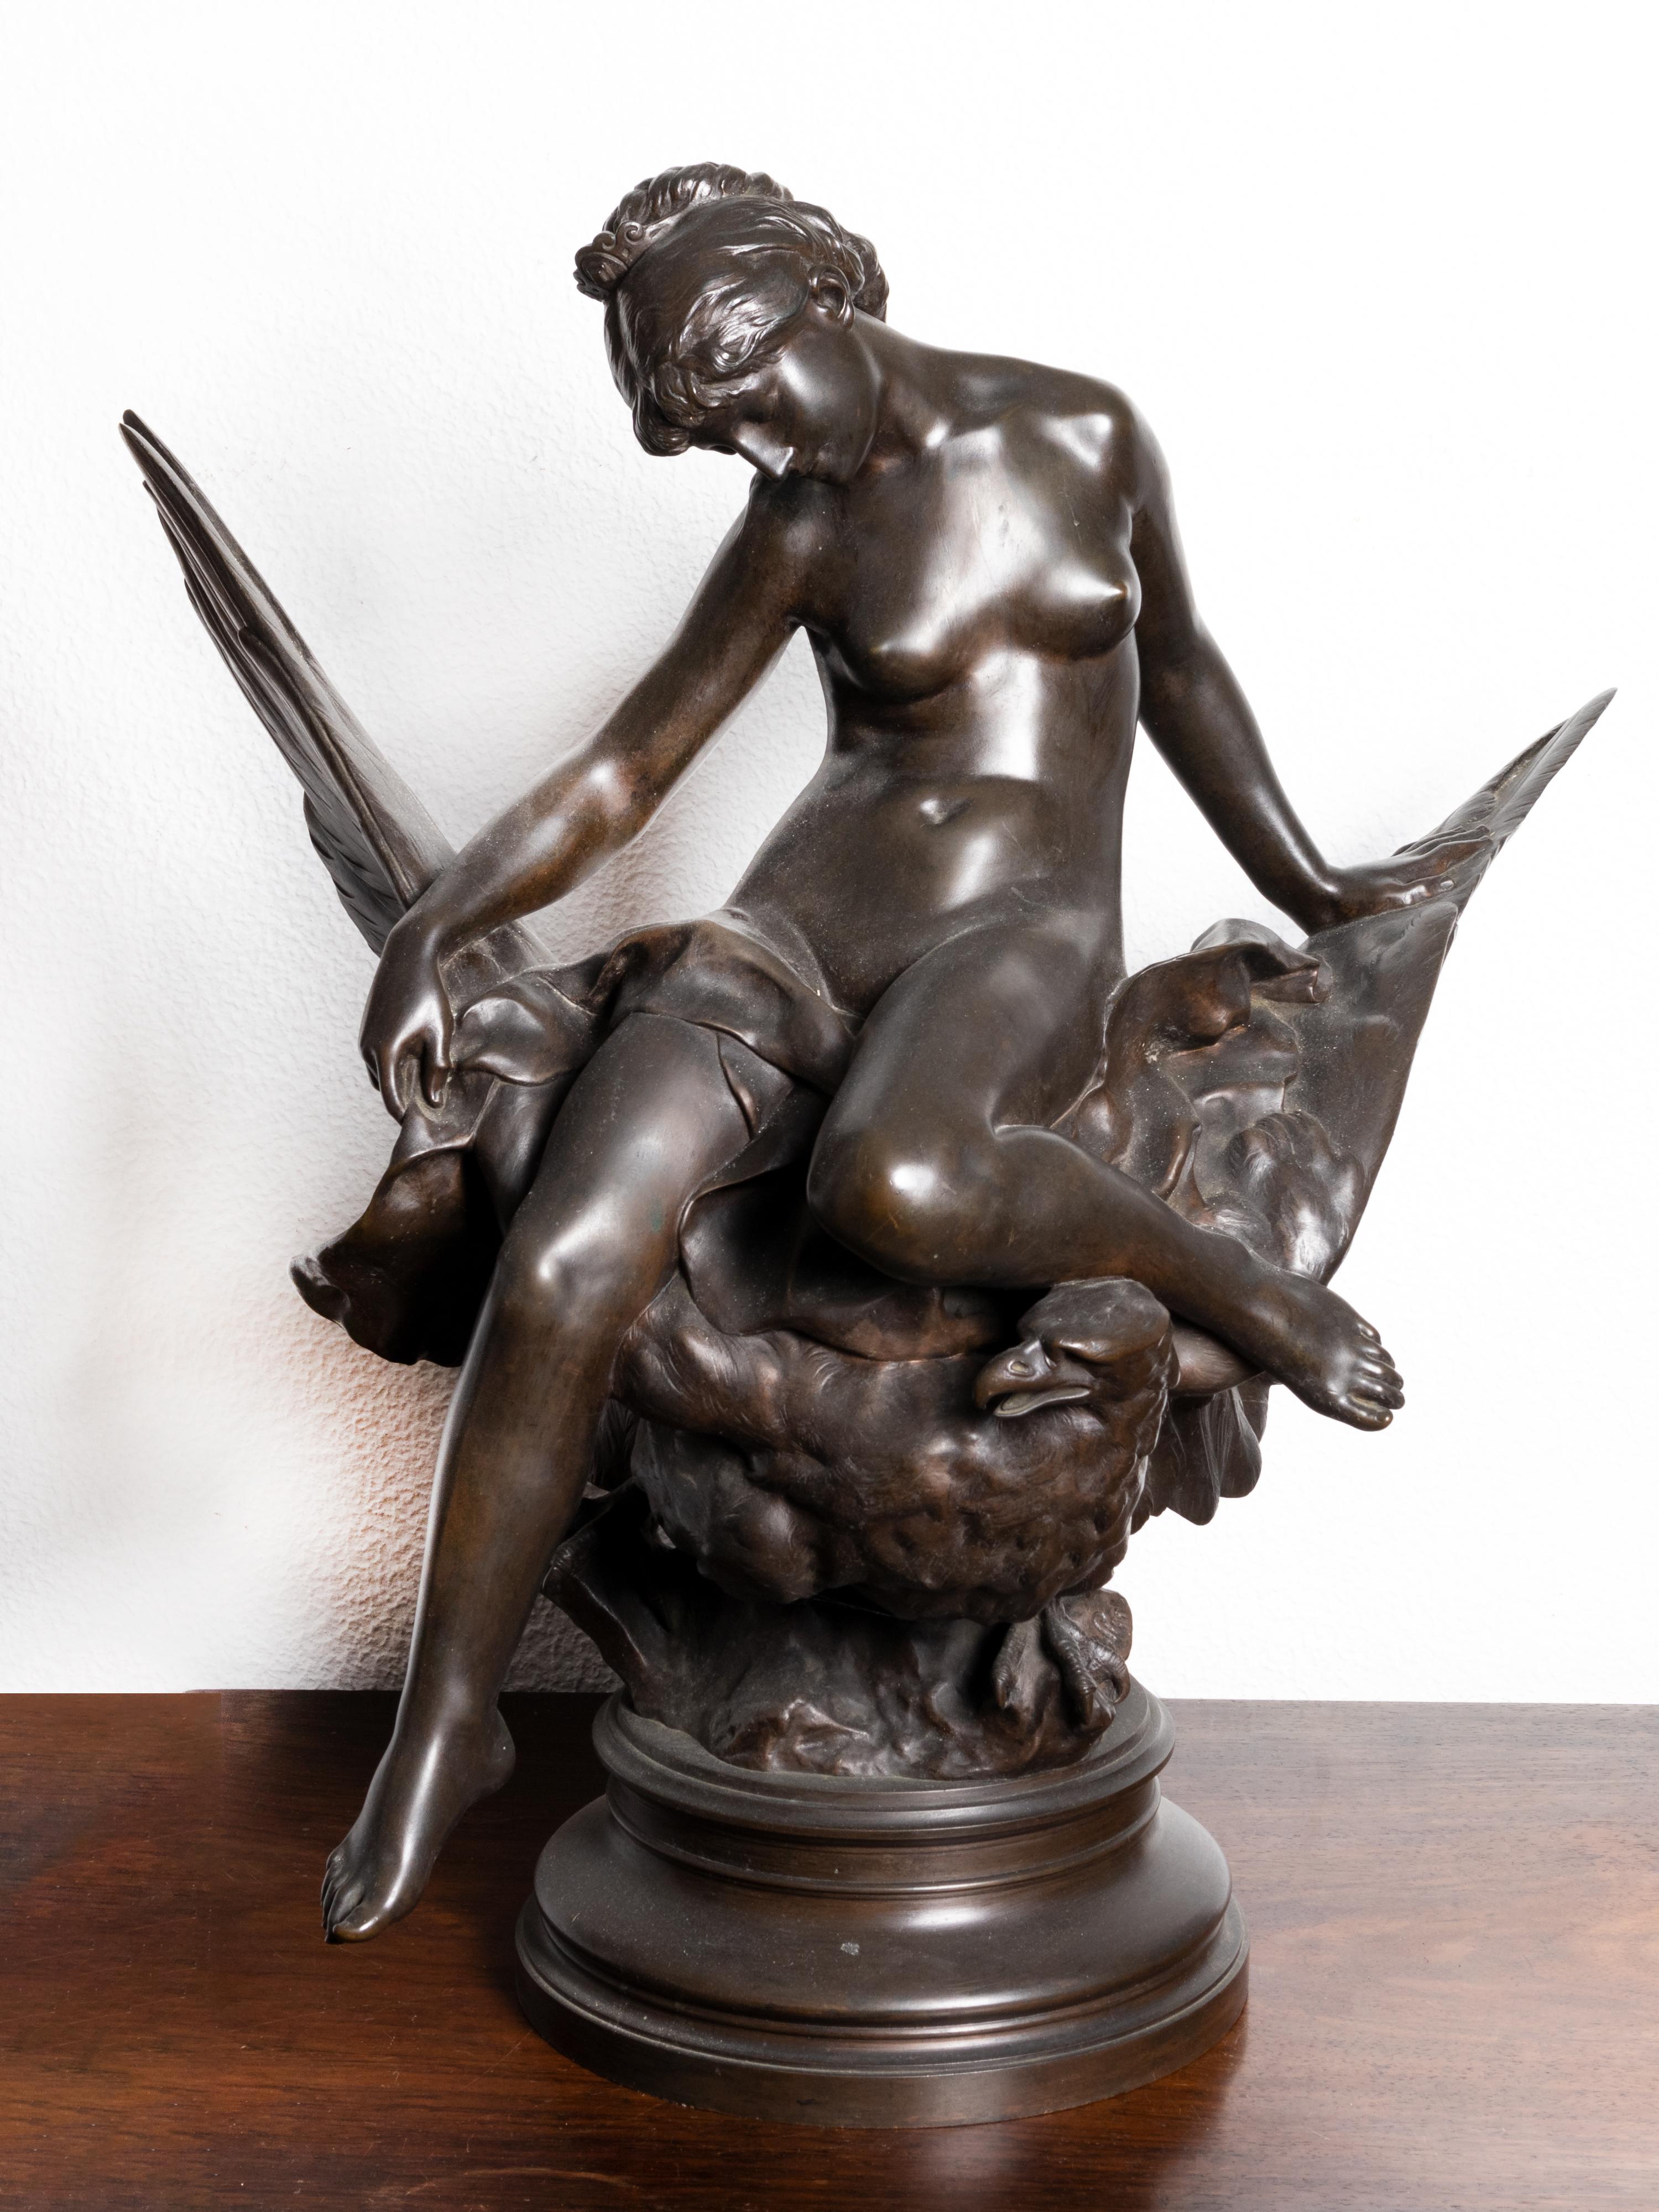 A ‘Hebe and the eagle of Jupiter’ statue by the artist Jules Pierre Roulleau. Statue depicting the Greek goddess of youth, Hebe, the cupbearer to the gods. 
Hebe raises a vessel of the divine beverage ambrosia above her father, Zeus, in the guise of